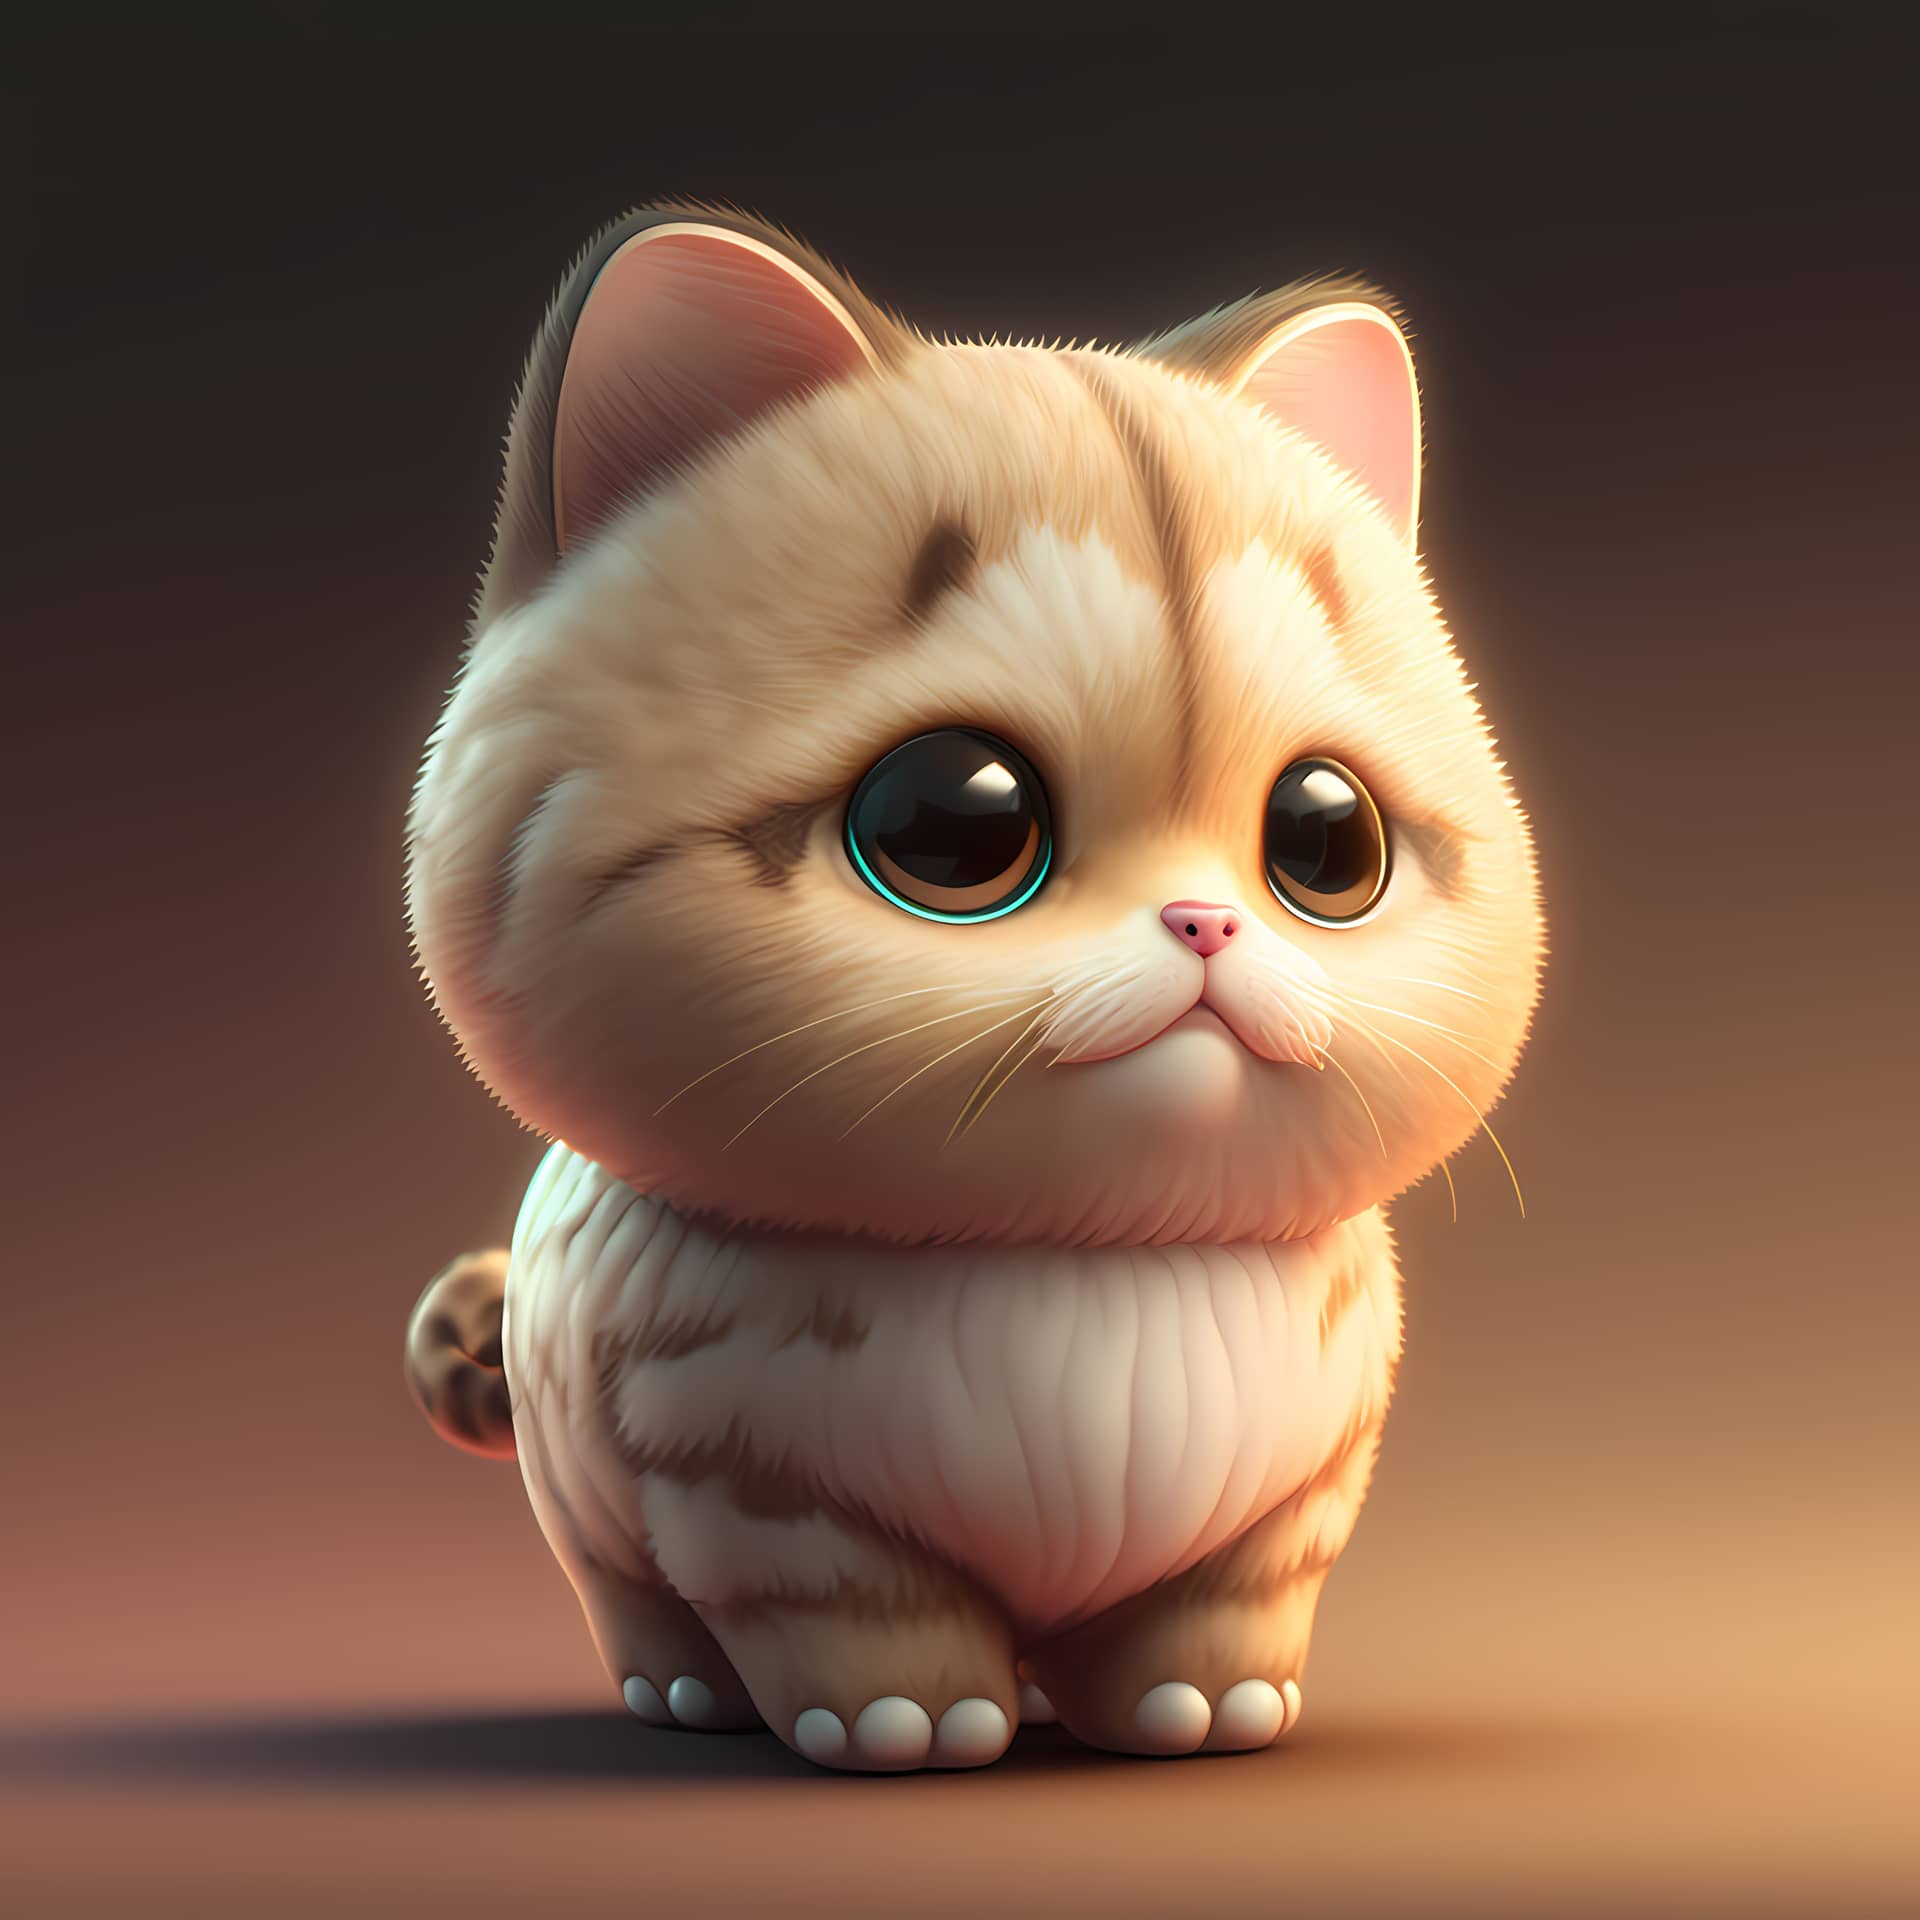 Adorable cute chubby cat 3d render nice picture